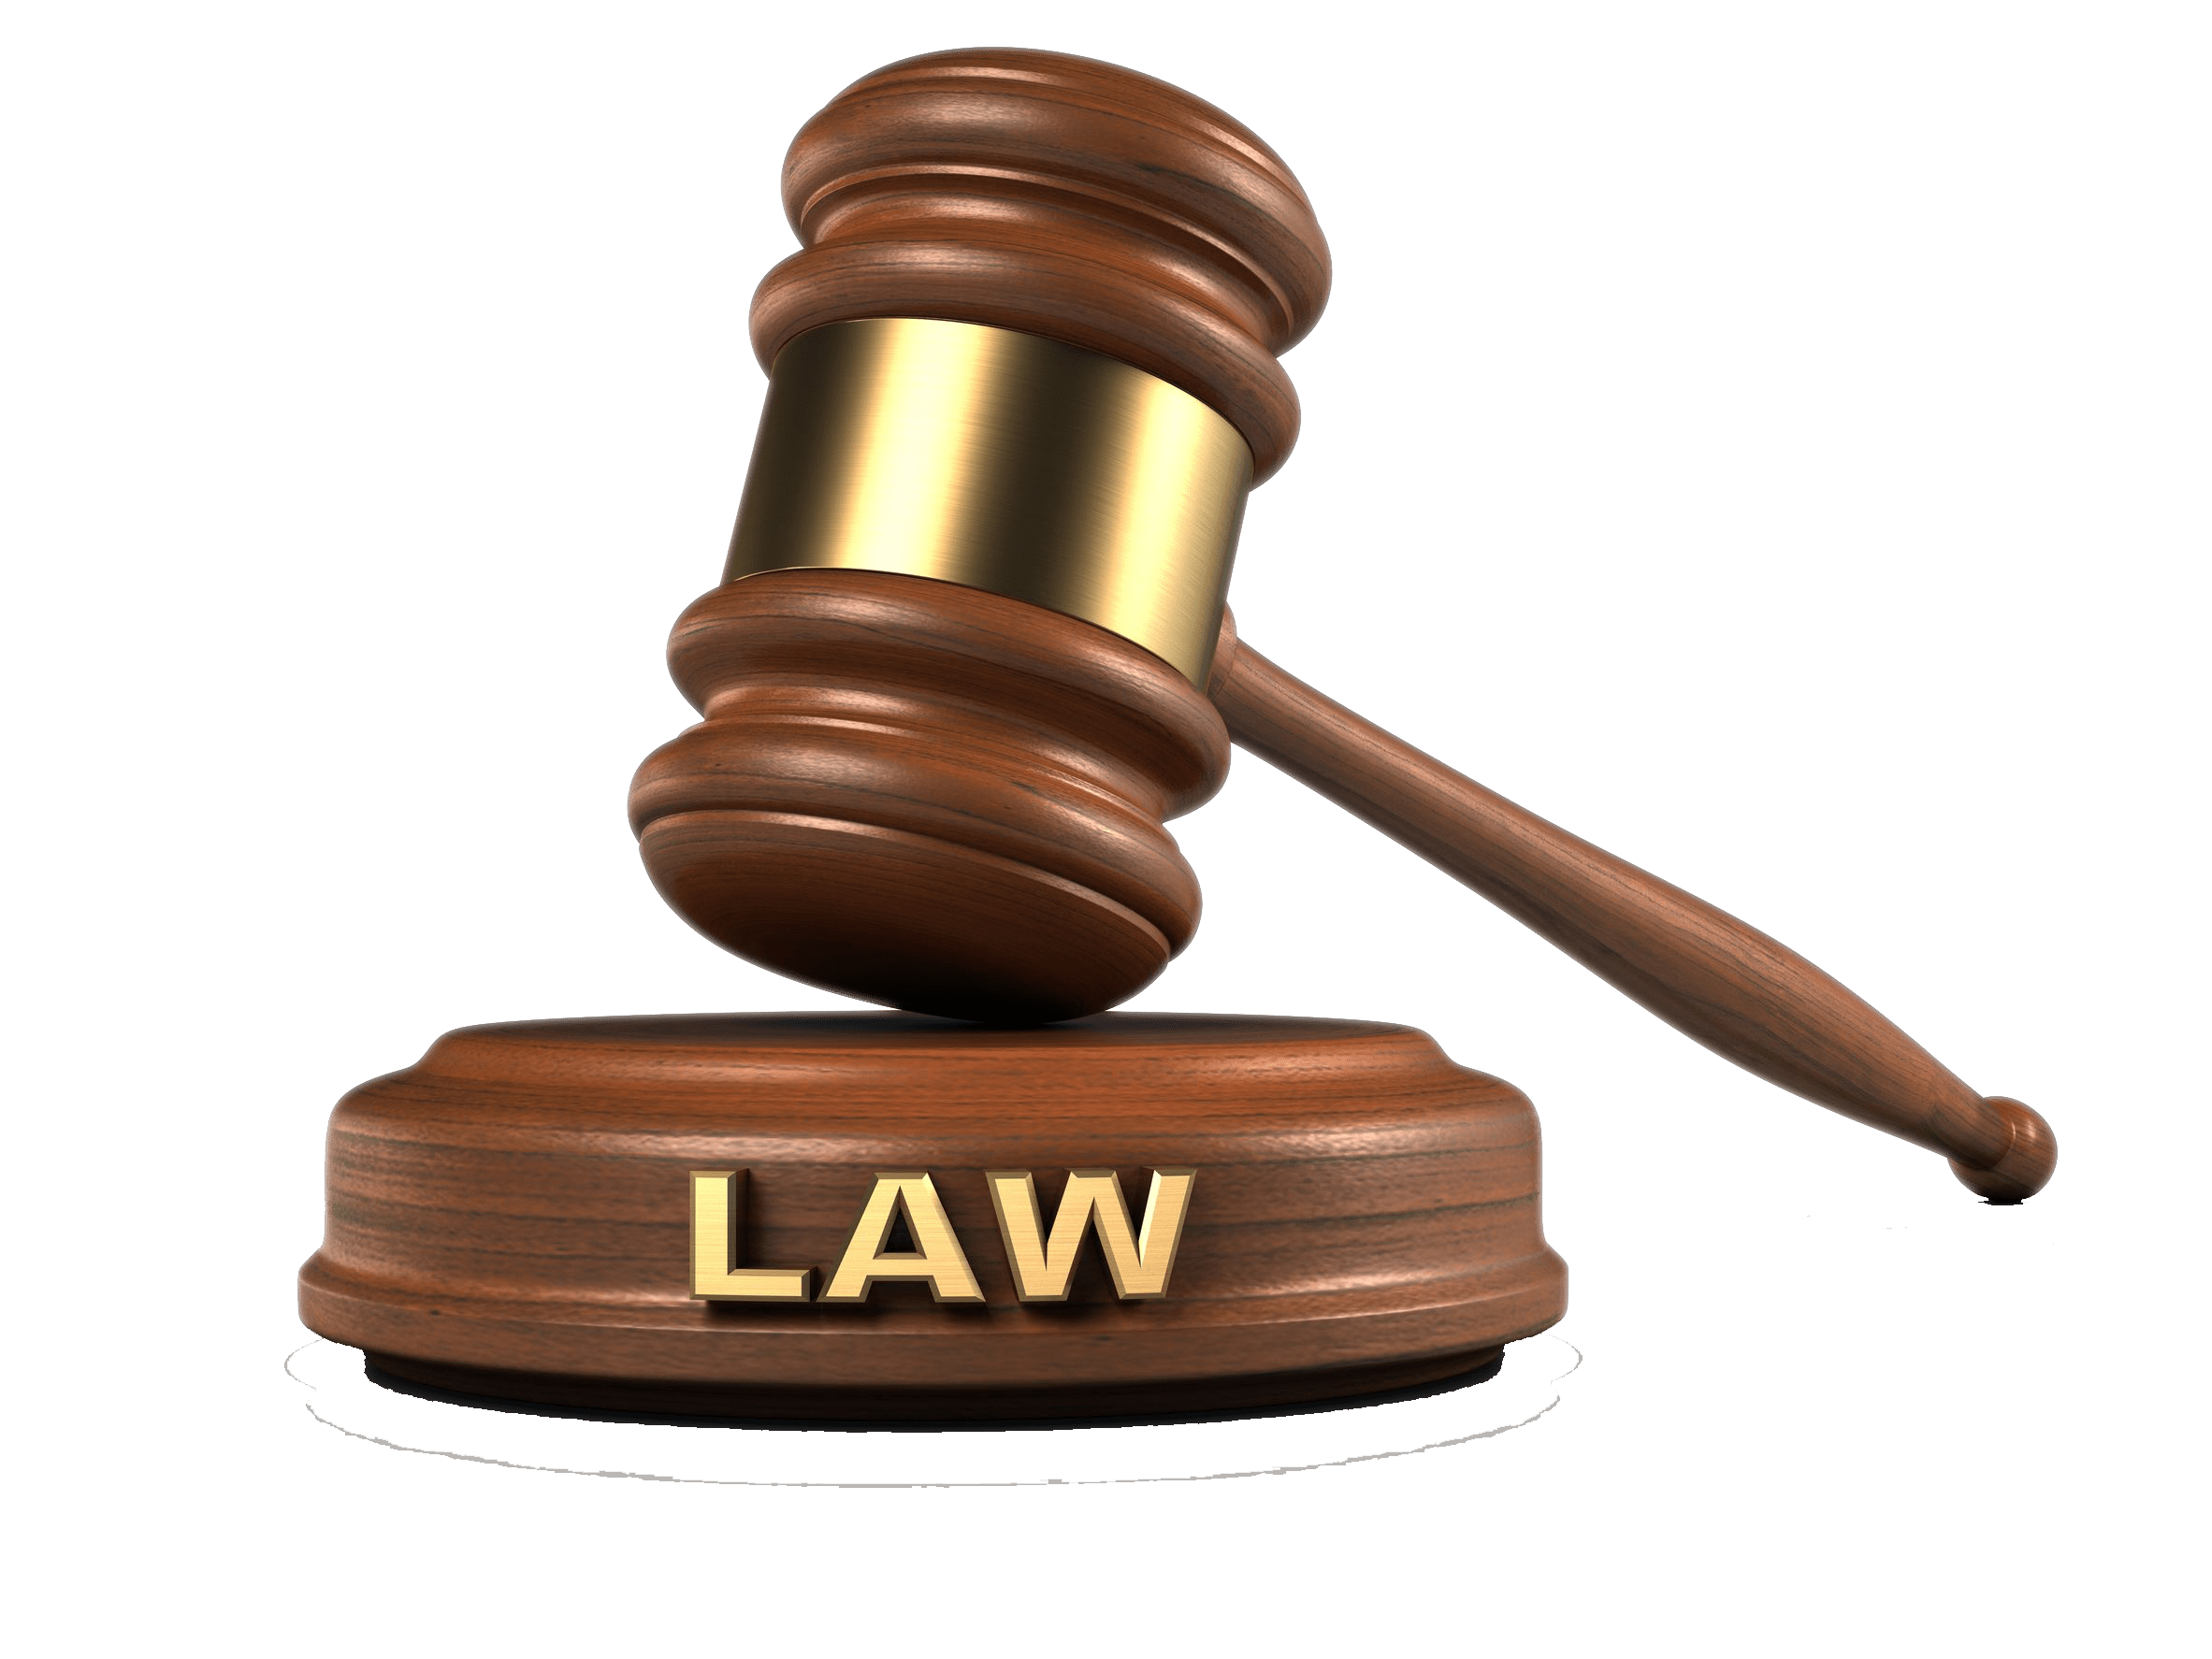 3 Nawec staff in court for allegedly stealing 50 gallons of gasoil